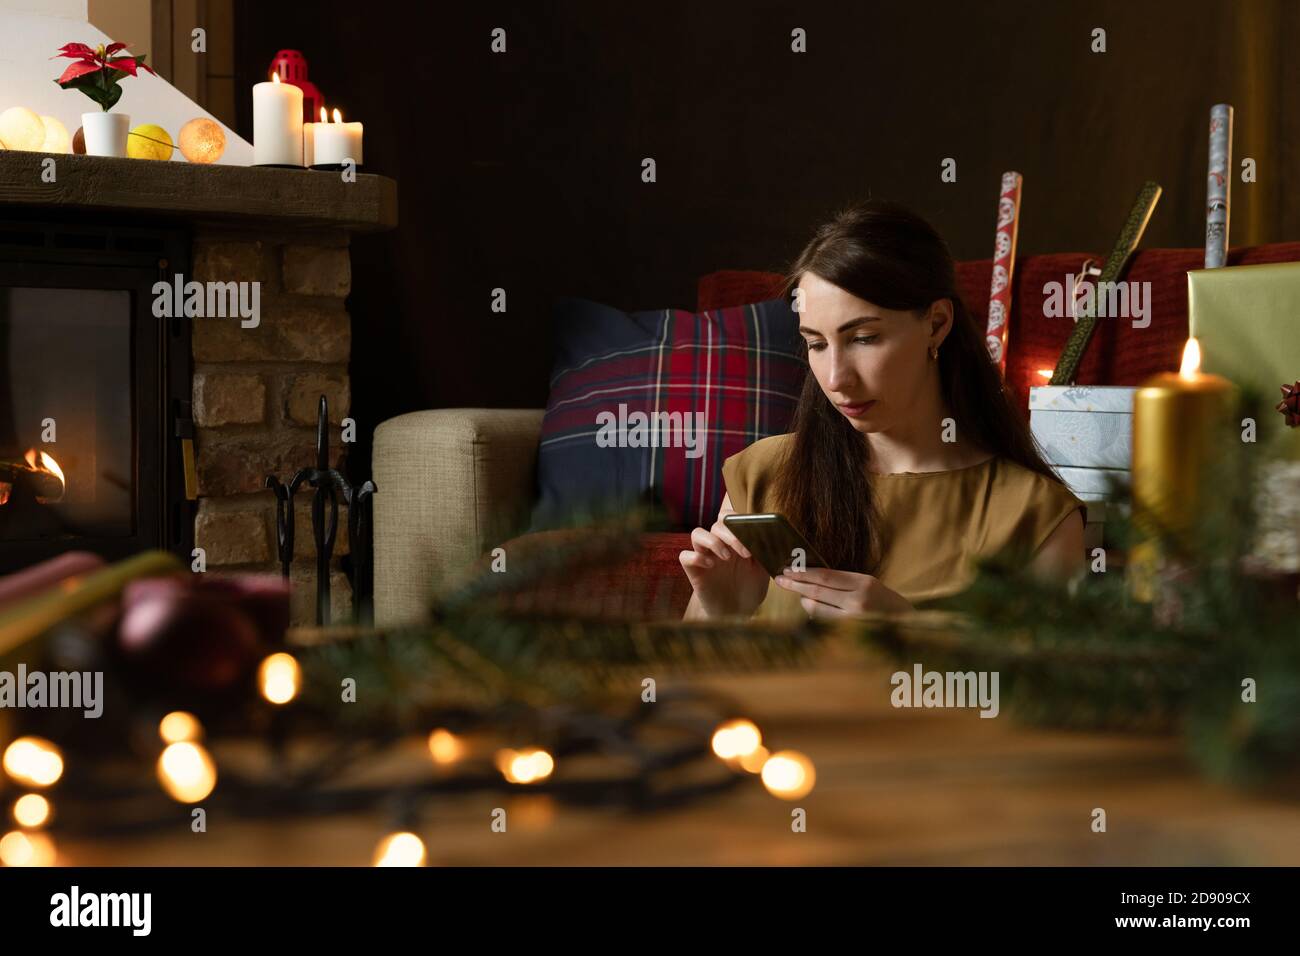 Gift workshop in a warm cozy room. Christmas decorations by fireplace. Stock Photo